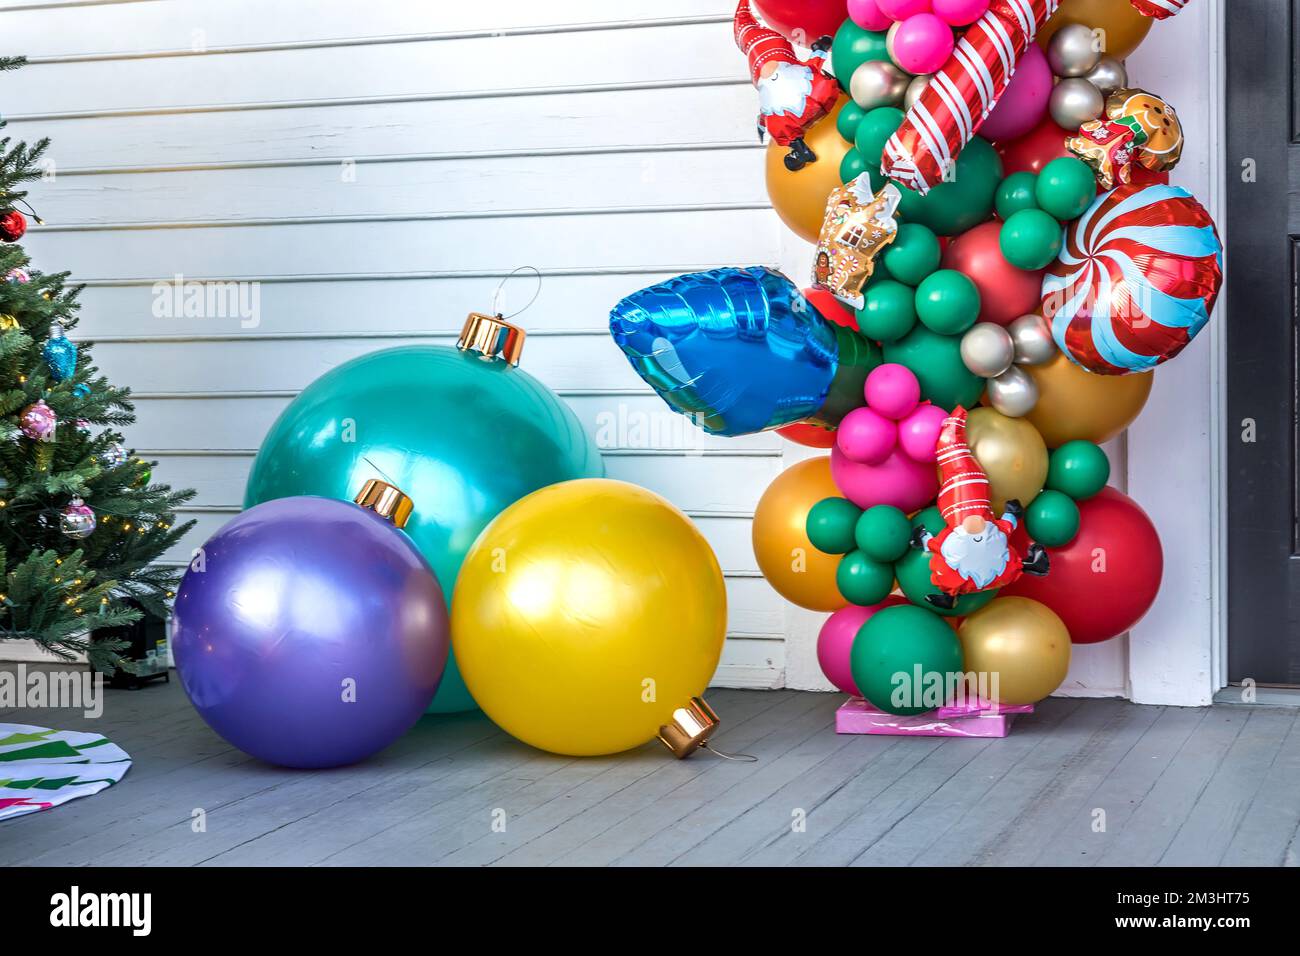 https://c8.alamy.com/comp/2M3HT75/a-white-siding-building-exterior-with-balloons-and-large-ornamentsfor-a-festive-christmas-decoration-or-decor-2M3HT75.jpg